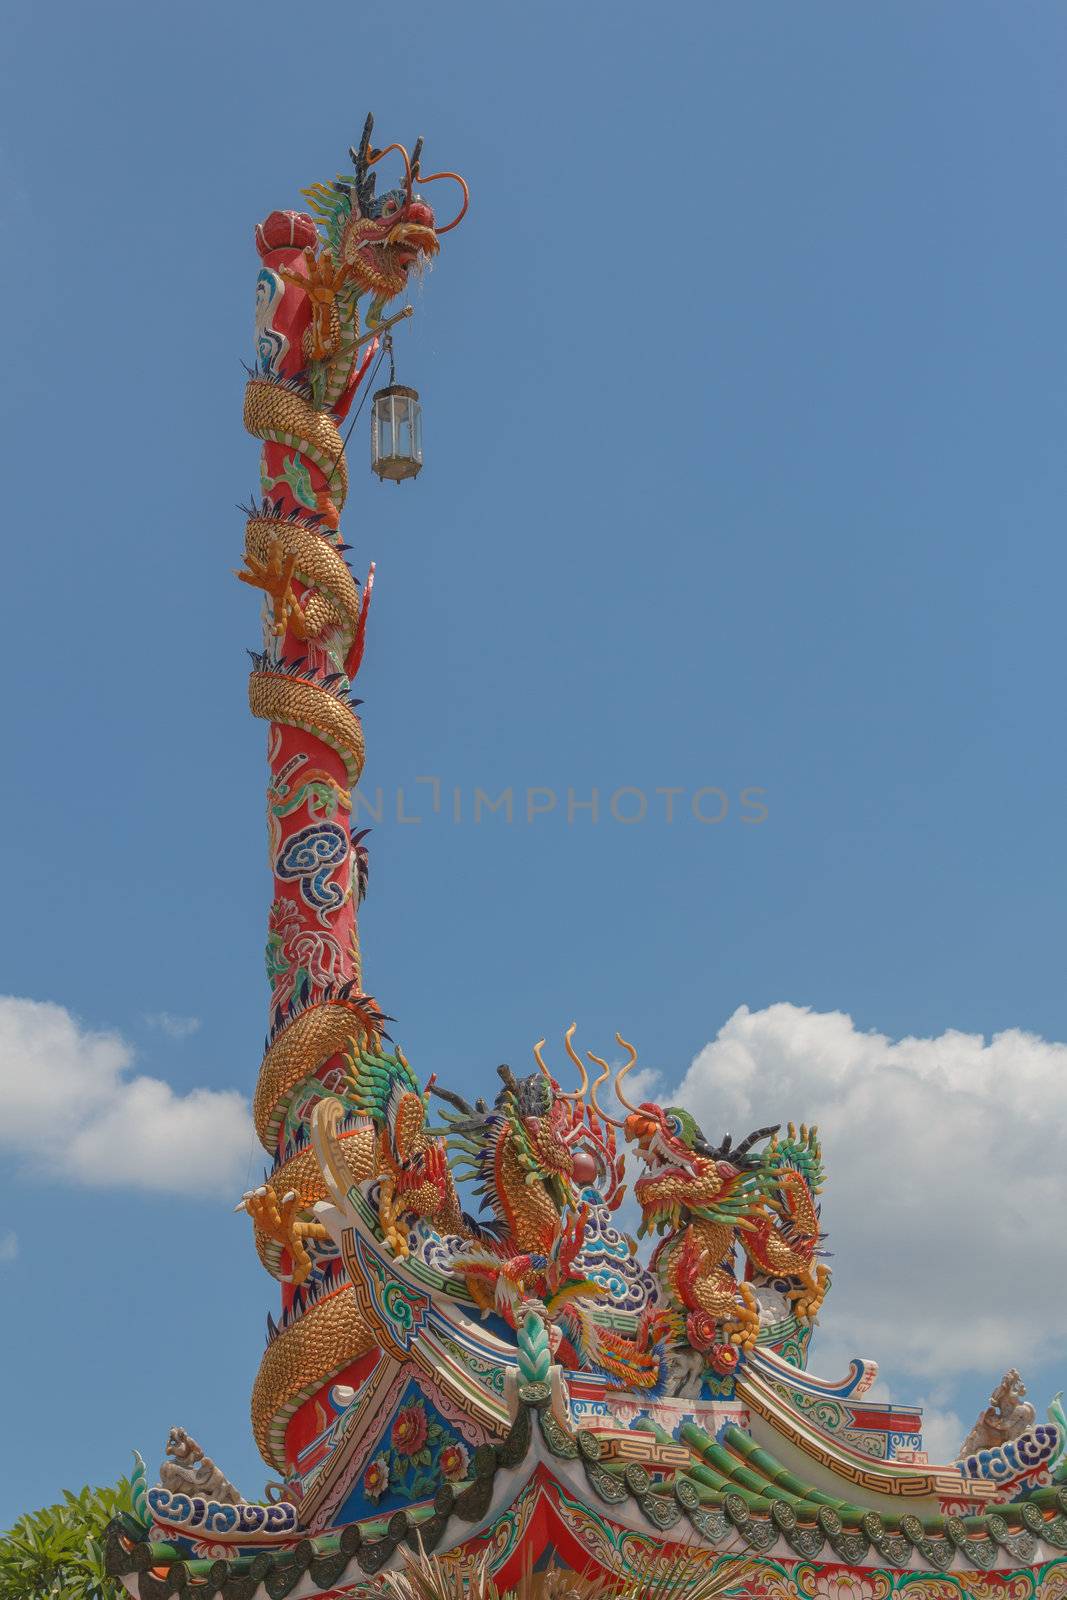 Symbolic of Chinese shrine is golden dragon. In general, two golden dragon are on the rooftop and another is on the top of the red pole with the sacred lantern. The photo is taken at chinese shrine in Bangkok, Thailand.